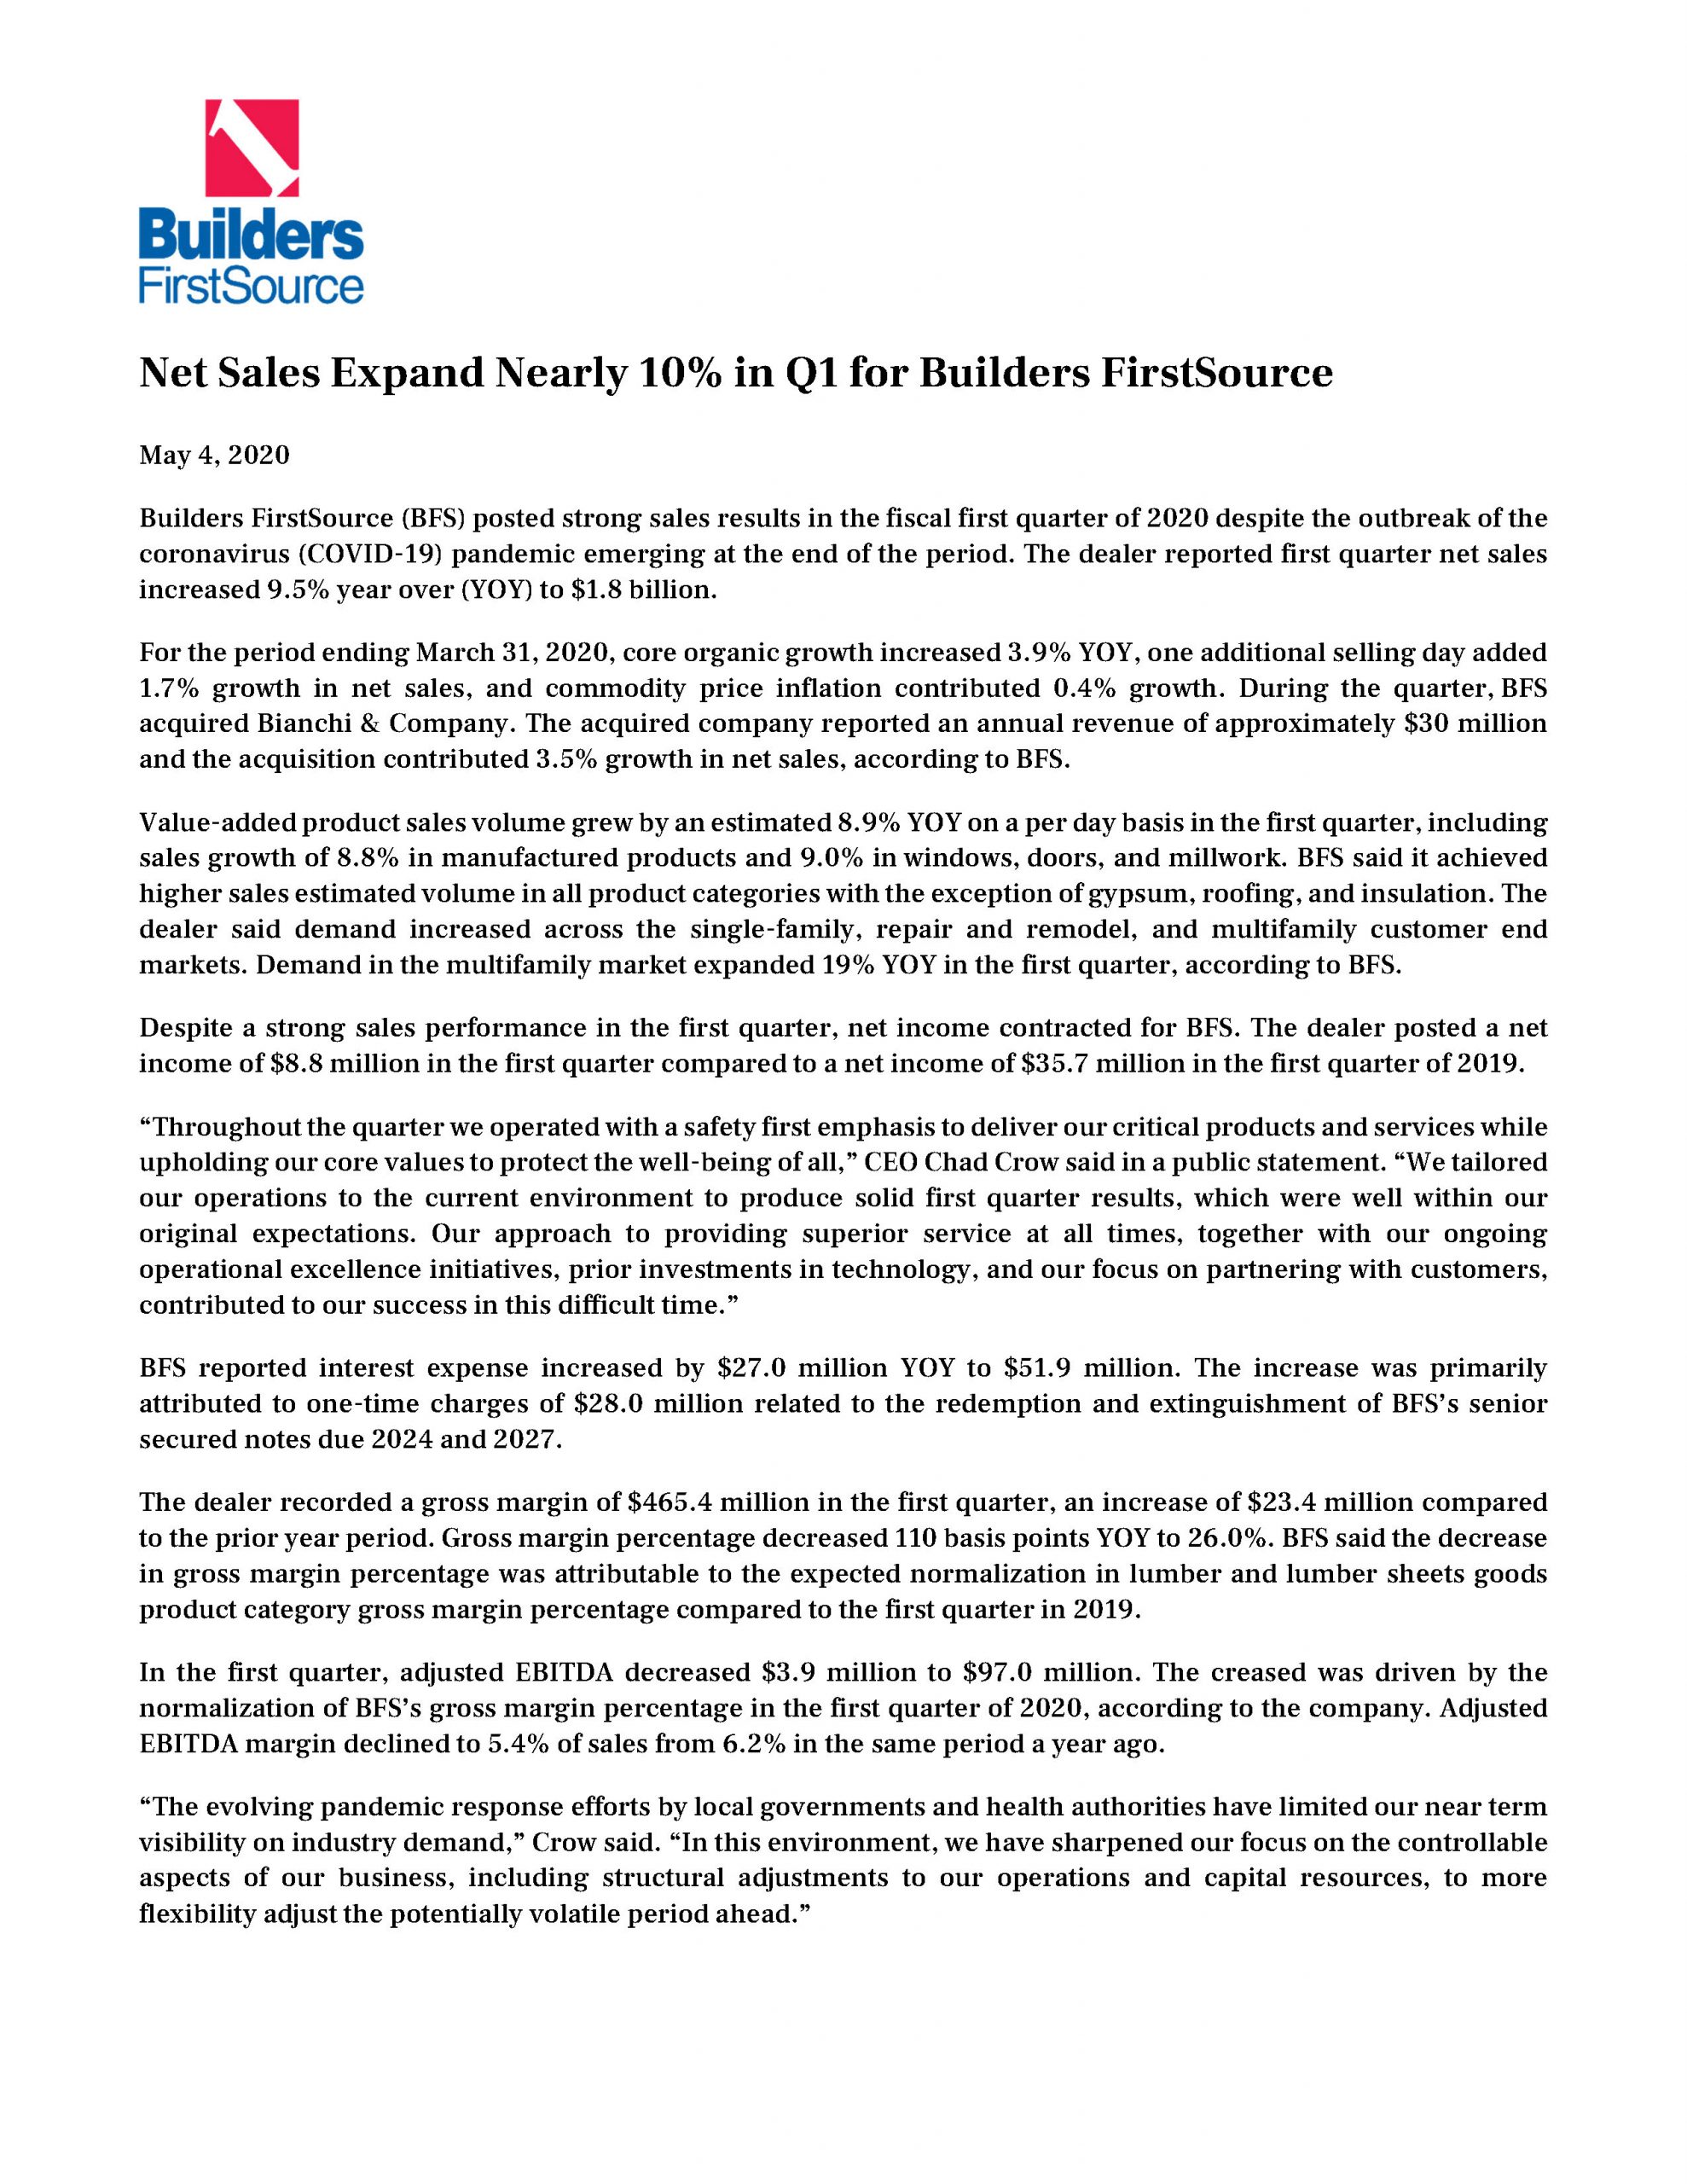 Net Sales Expand Nearly 10% in Q1 for Builders FirstSource 5.4.2020_Page_1